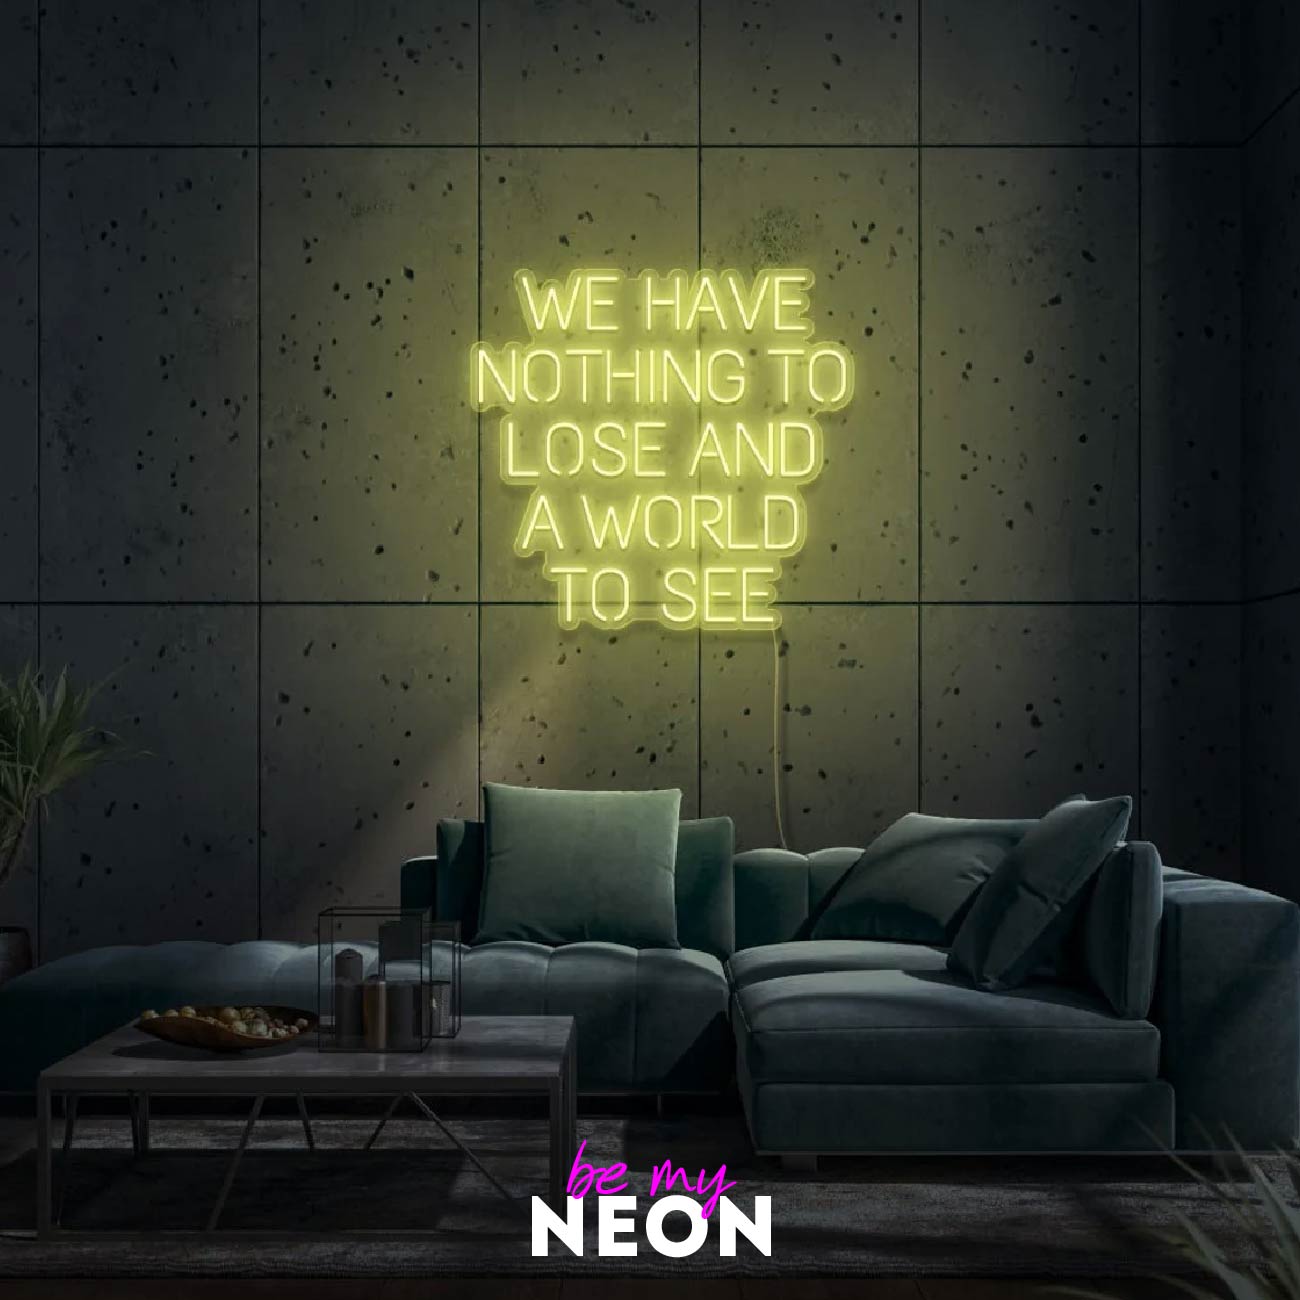 "We have nothing to lose and a world to see" LED Neonschild